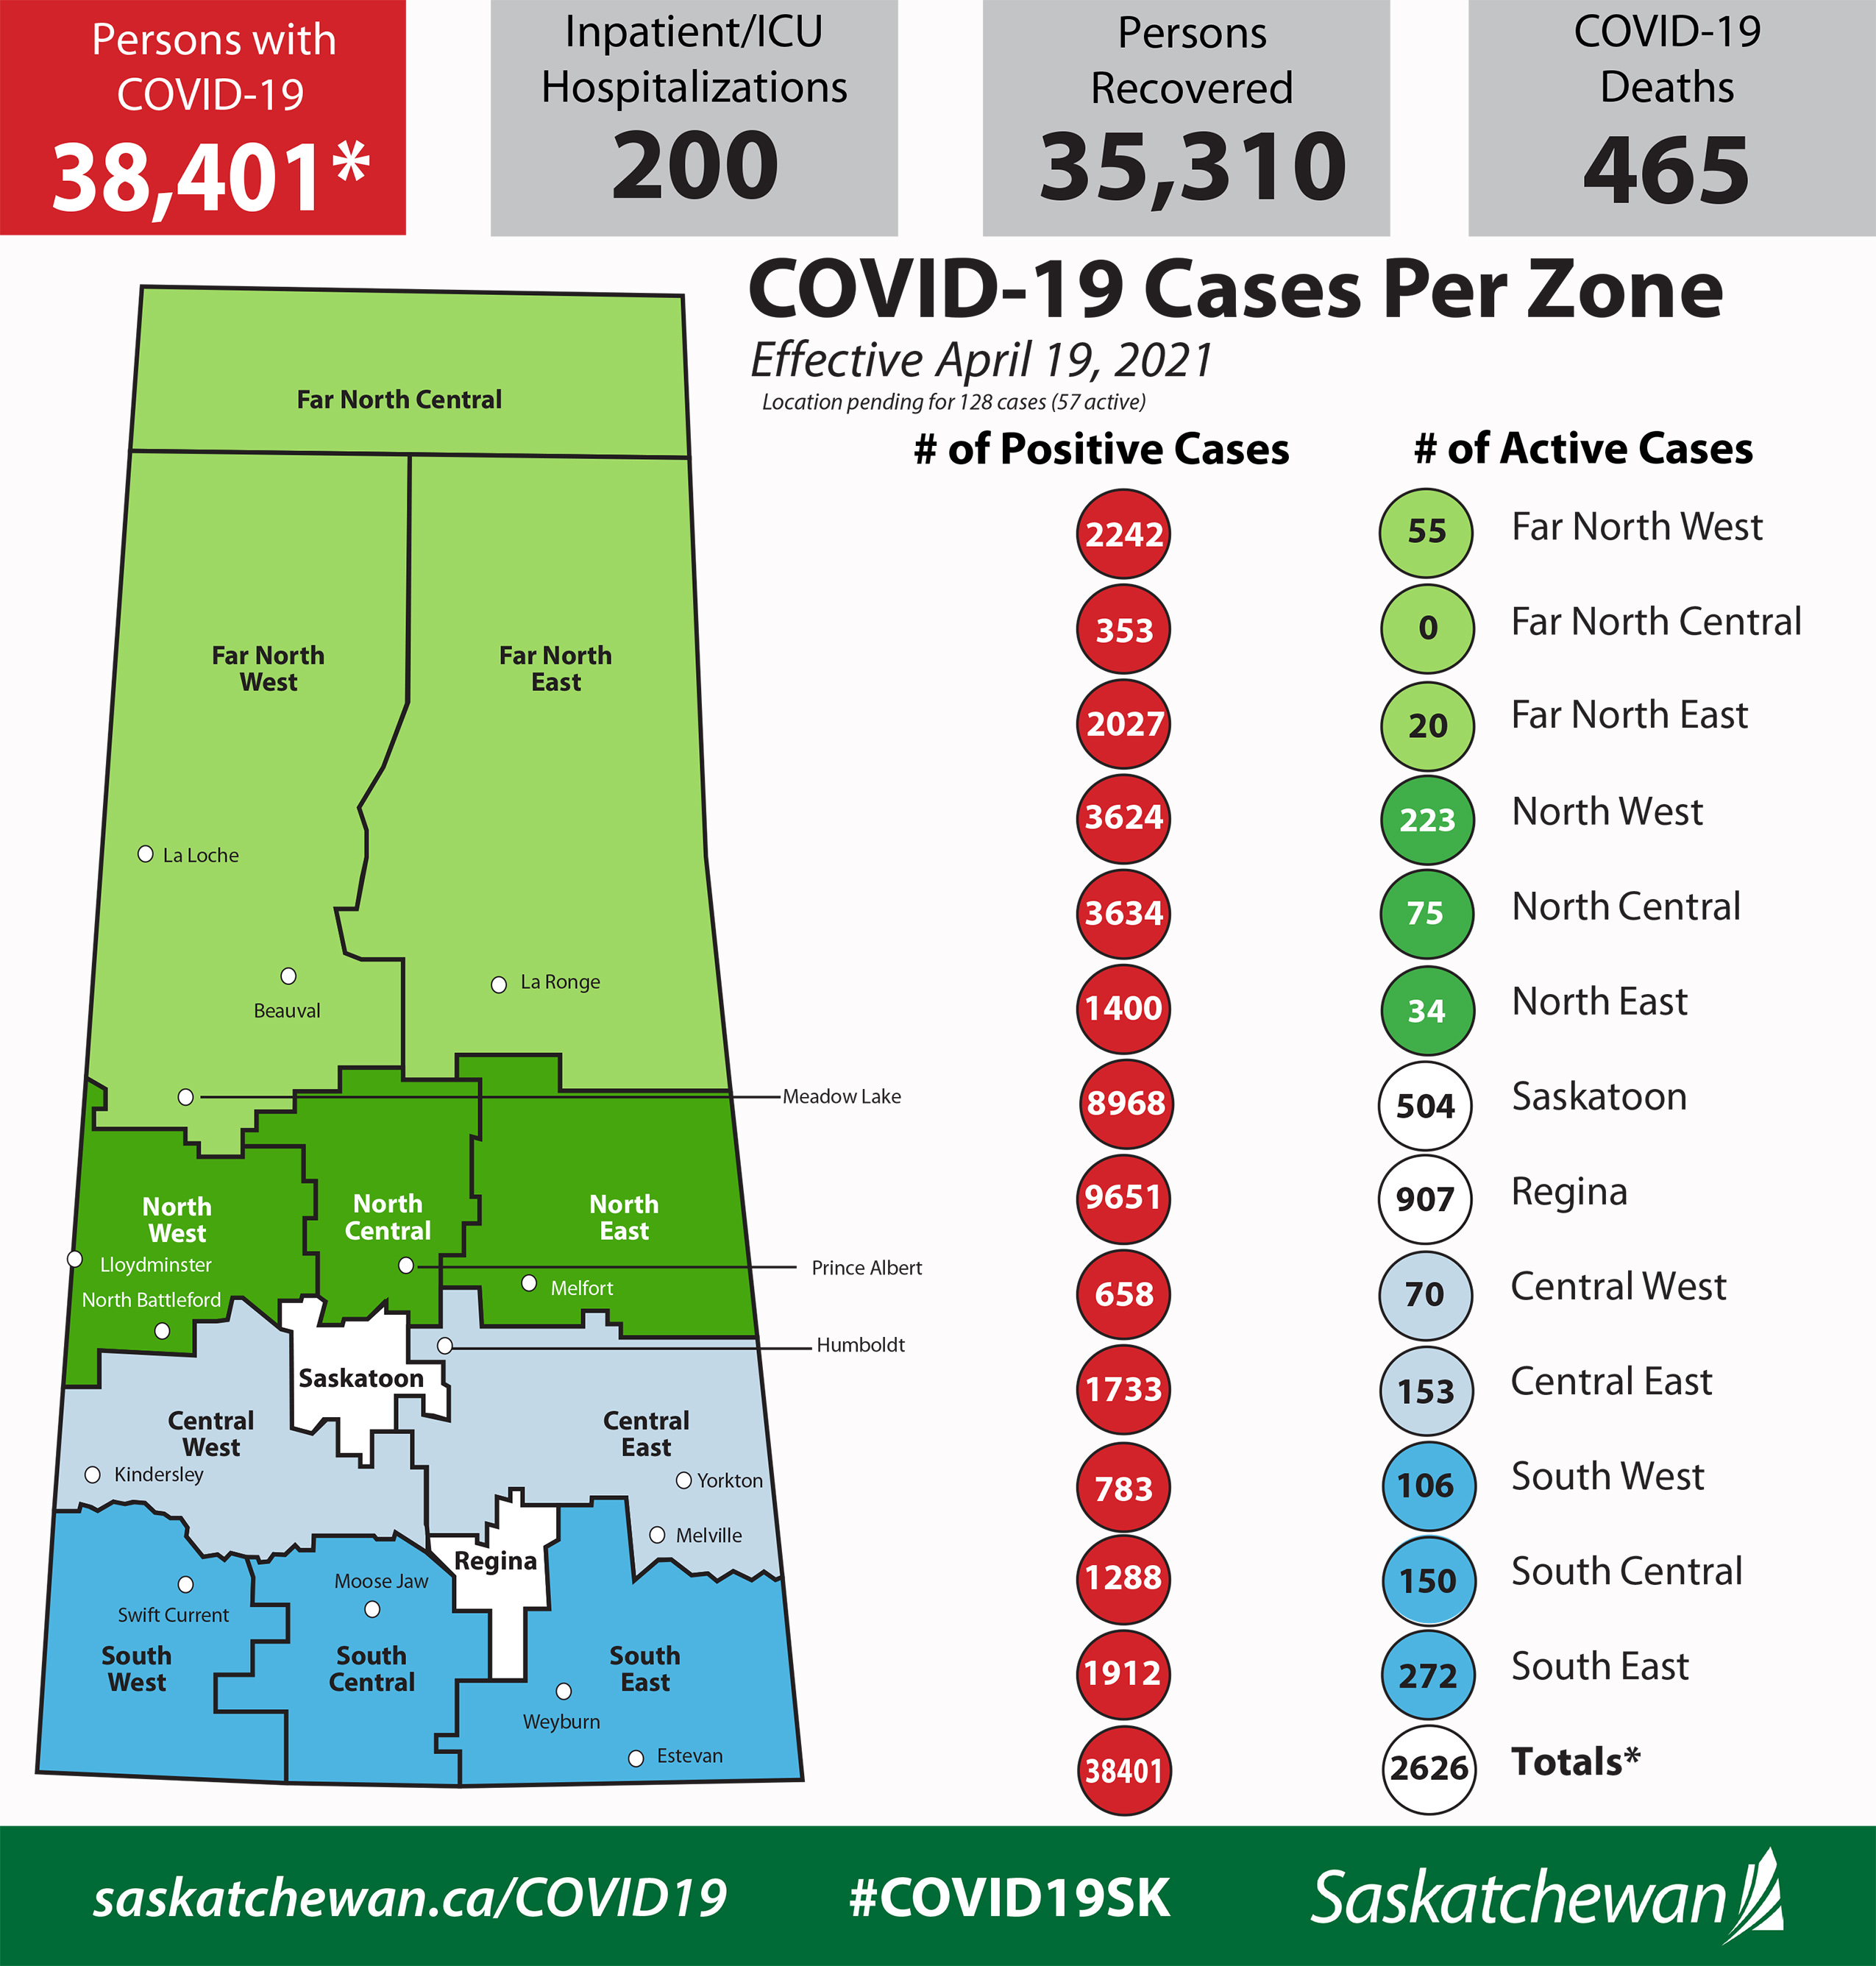 COVID-19 Update for April 19: 352,169 Vaccines Administered, 243 New Cases, 357 Recoveries, 200 People in Hospital, No New Deaths Current 7-Day Average: 253 (20.6 per 100,000). Full details: https://www.saskatchewan.ca/government/news-and-media/2021/april/19/covid19-update-for-april-19-352169-vaccines-administered-243-new-cases-357-recoveries-no-new-deaths COVID-19 Dashboard: https://dashboard.saskatchewan.ca/health-wellness